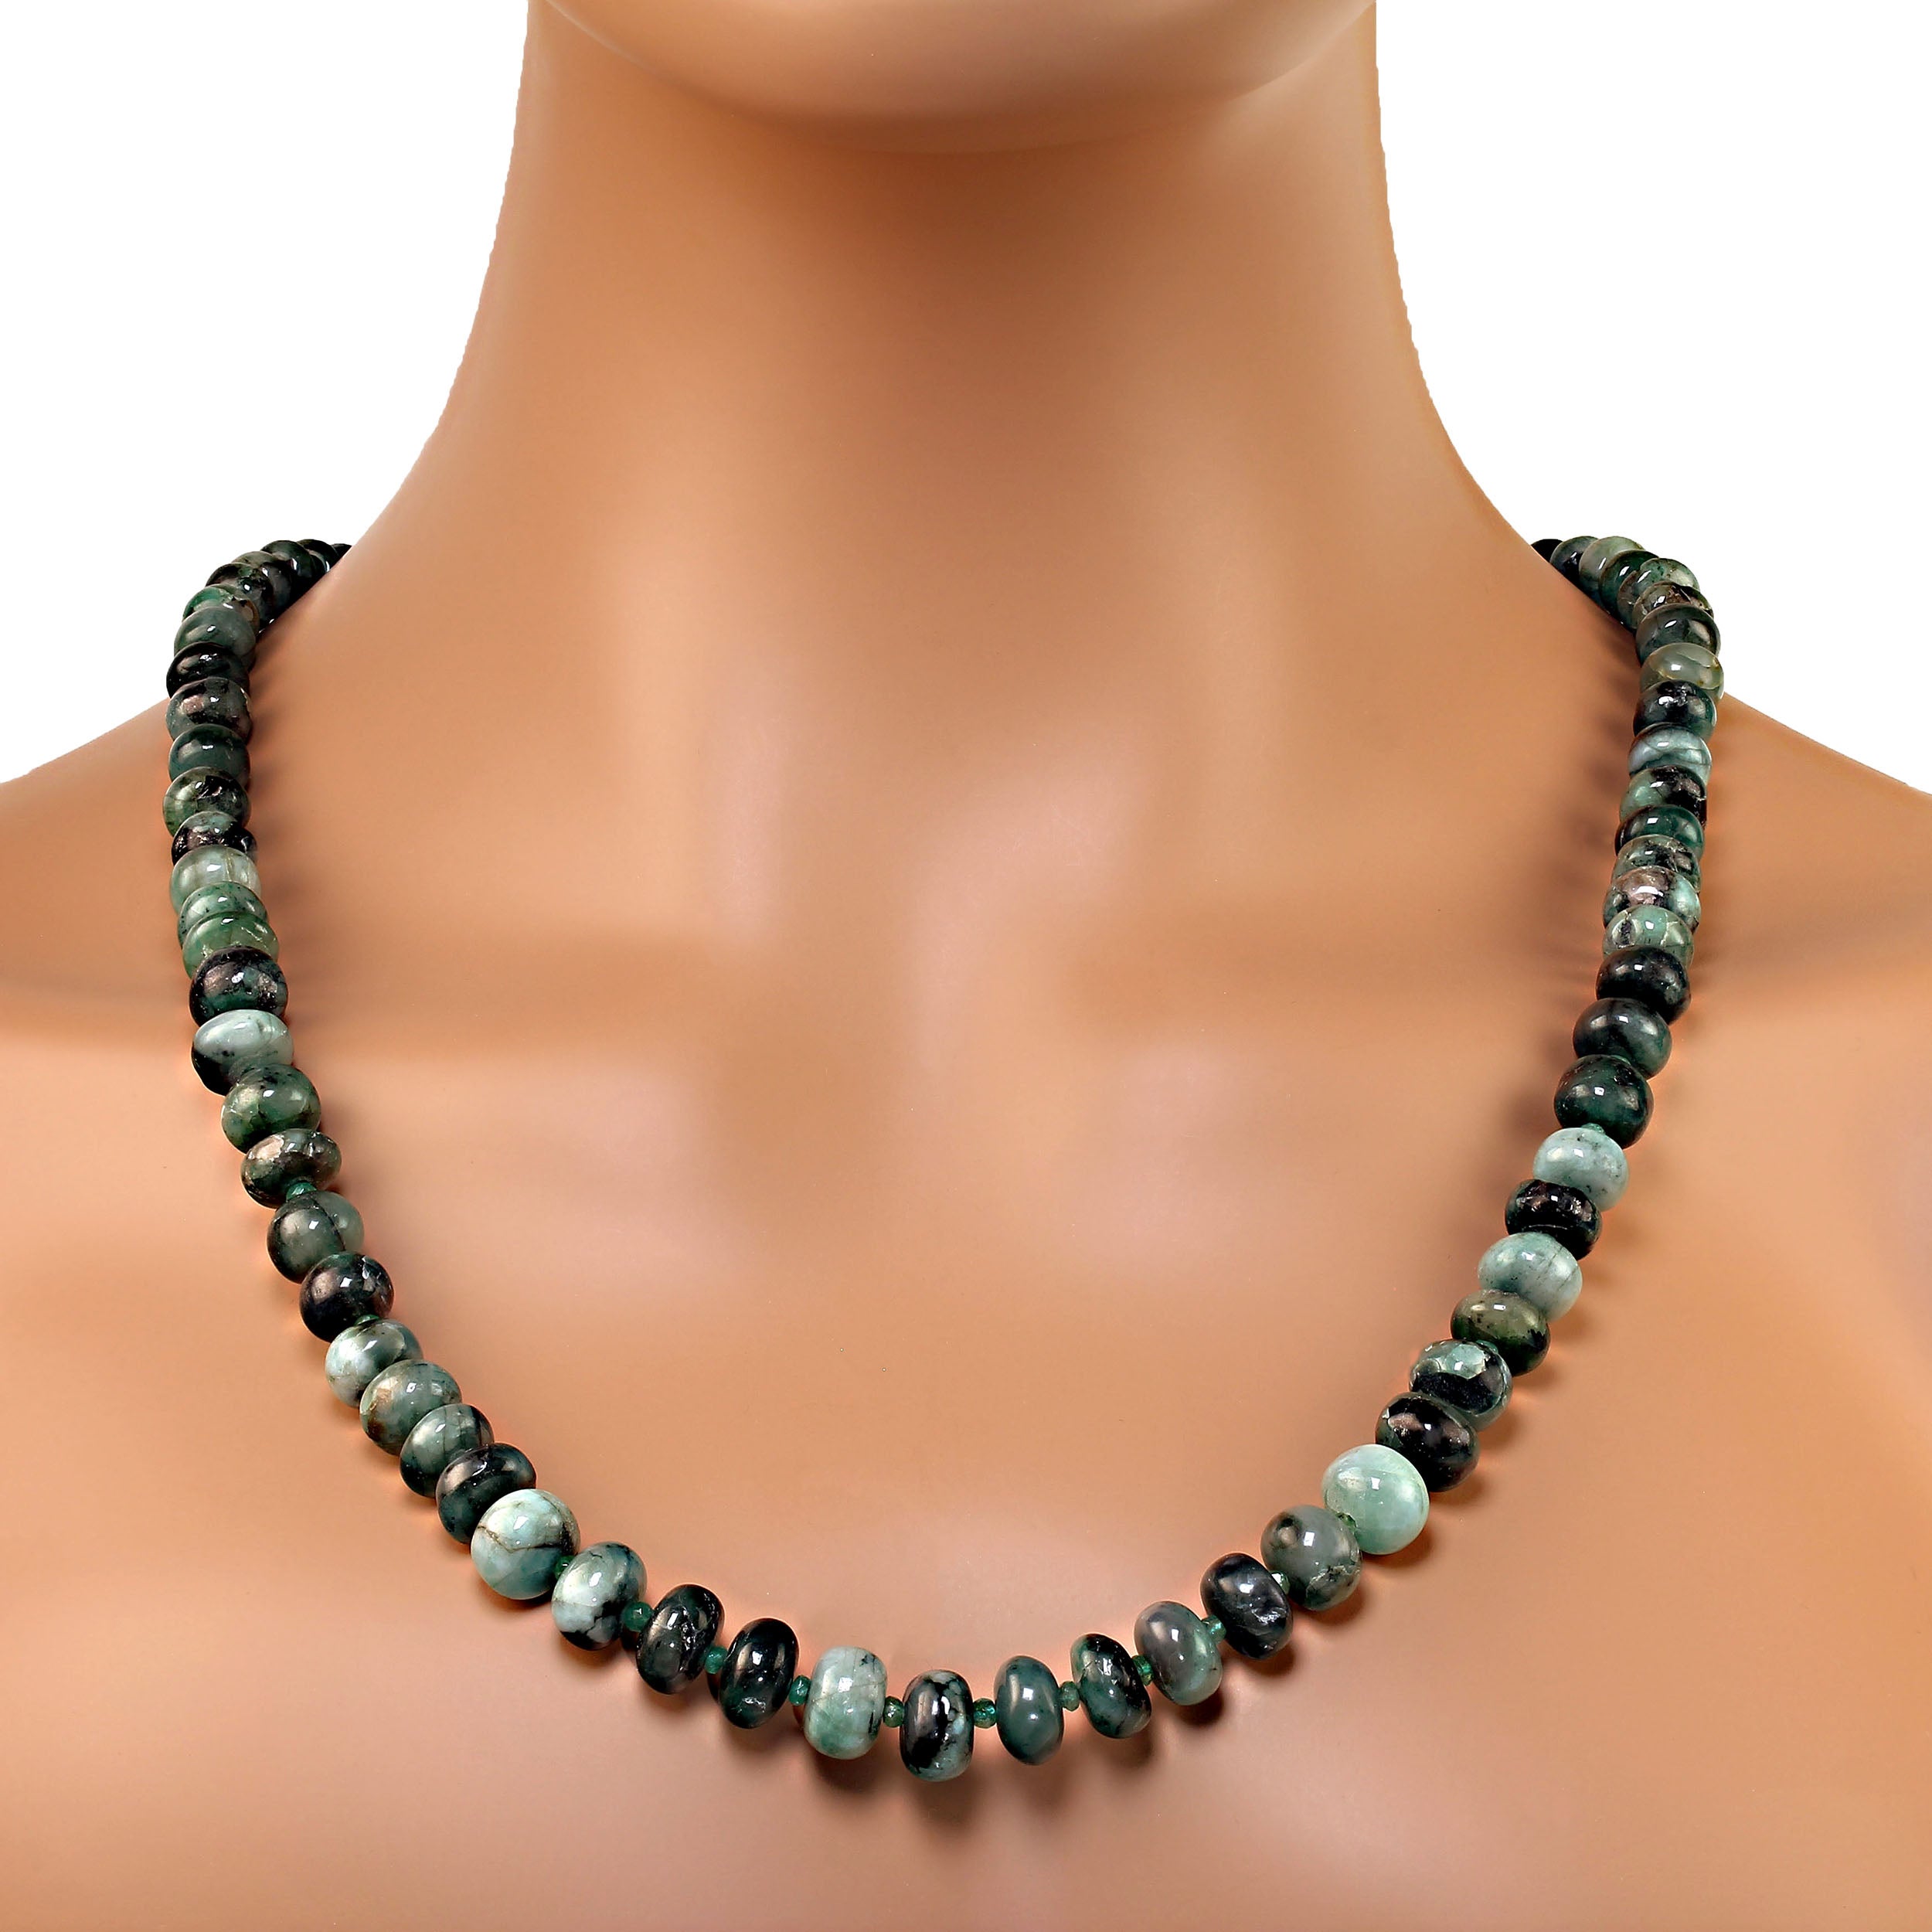 AJD 25 Inch Graduated Rich Green Emerald Matrix Rondelle necklace. Great Gift! For Sale